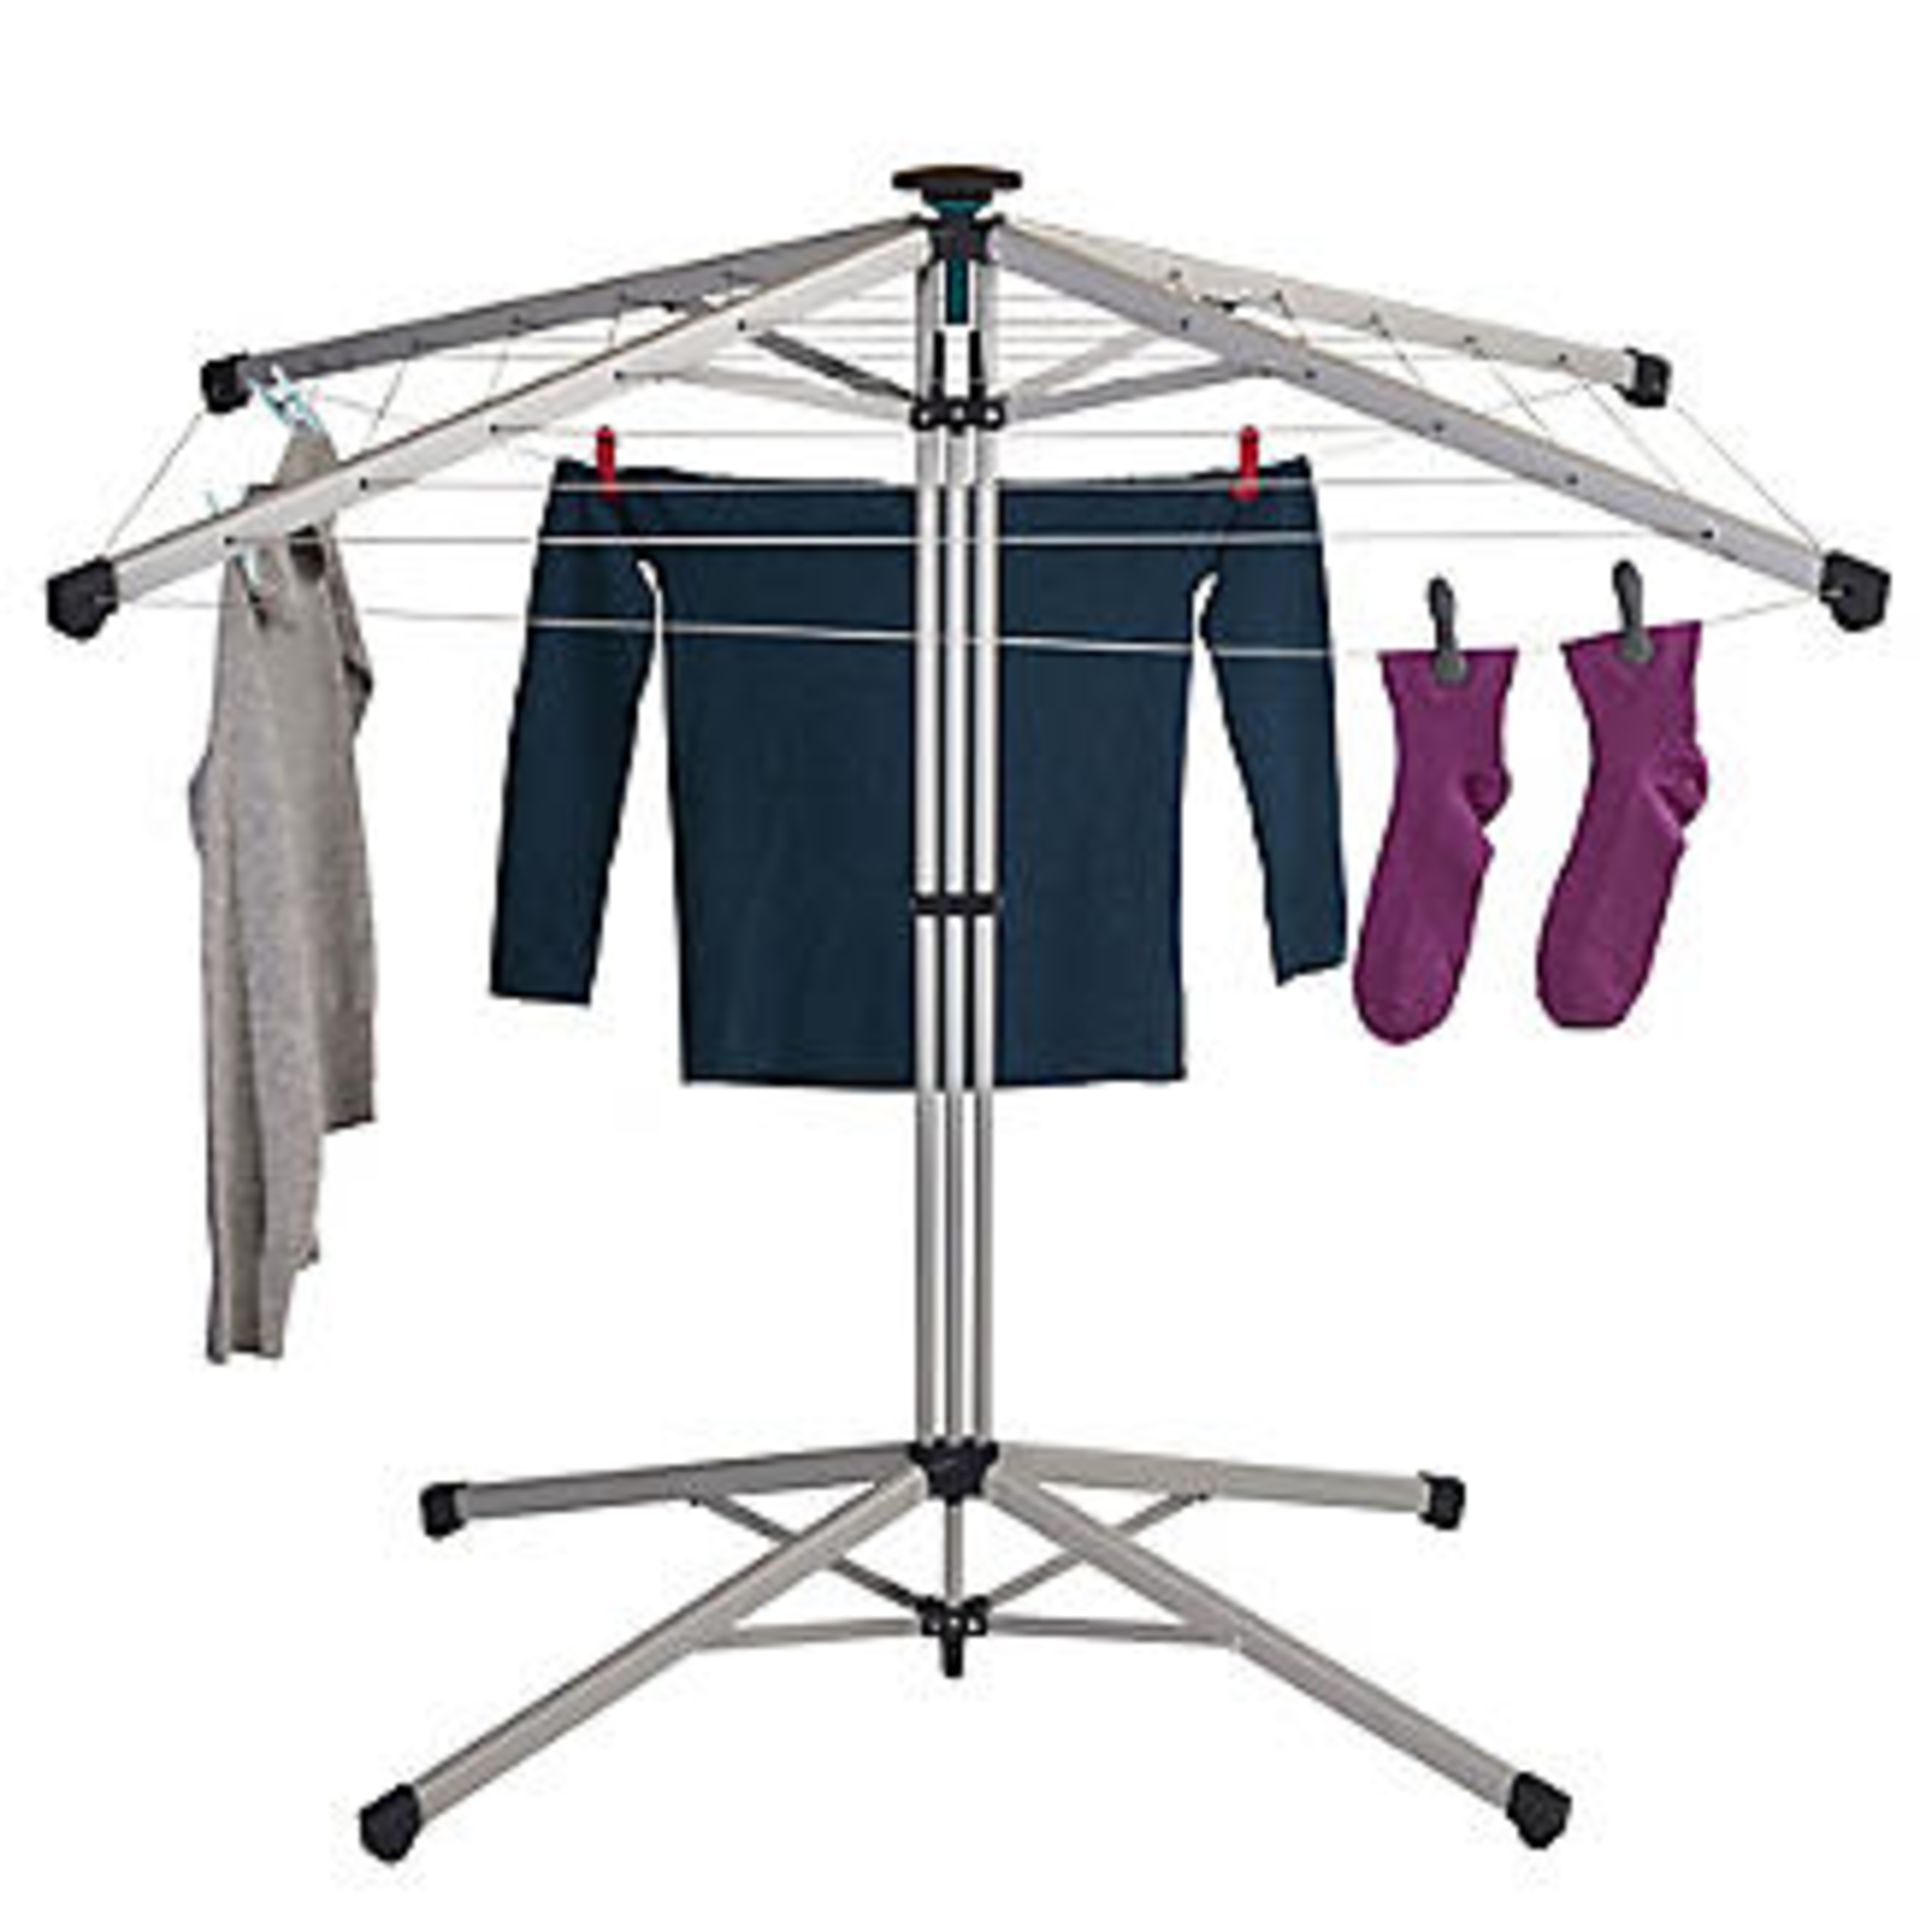 1 BOXED LEIFHEIT LINO POP-UP 140 CLOTHES AIRER RRP Â£64.99